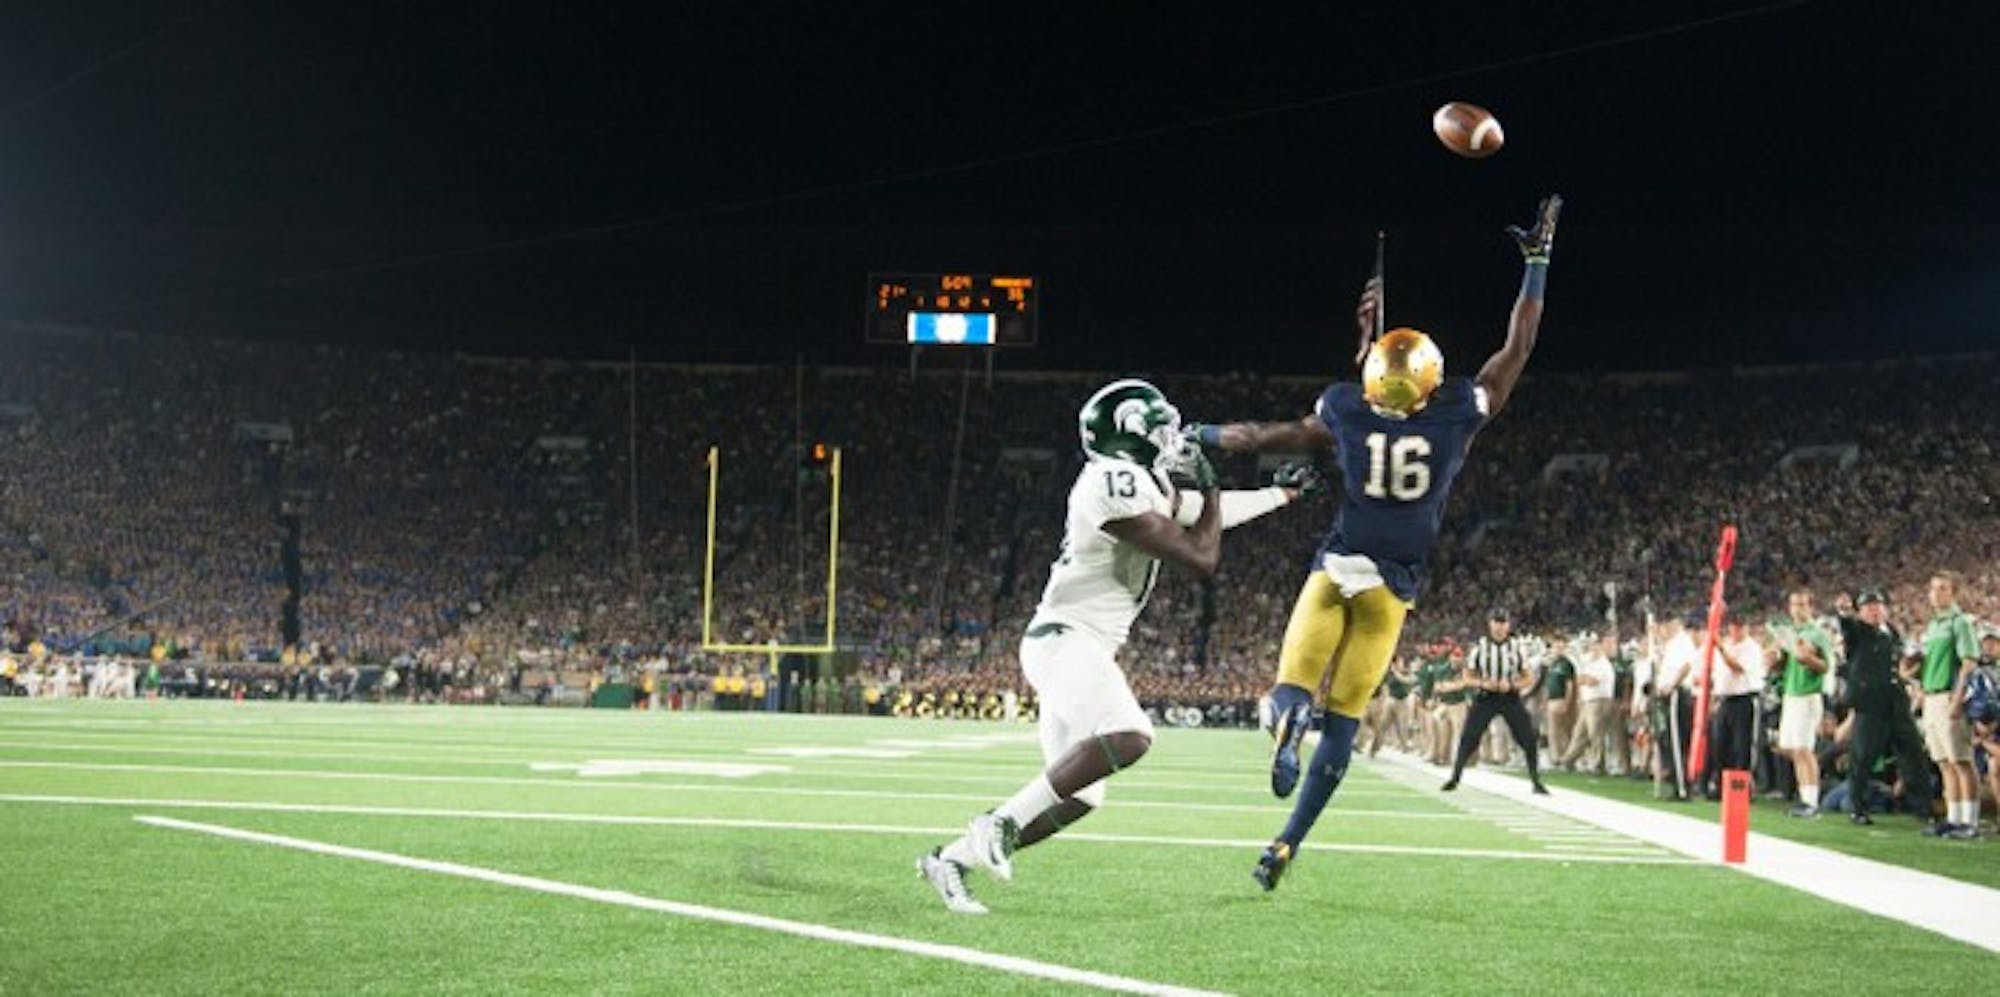 Irish senior receiver Torii Hunter Jr. leaps for a pass during Notre Dame’s 36-28 home loss to Michigan State last Saturday.